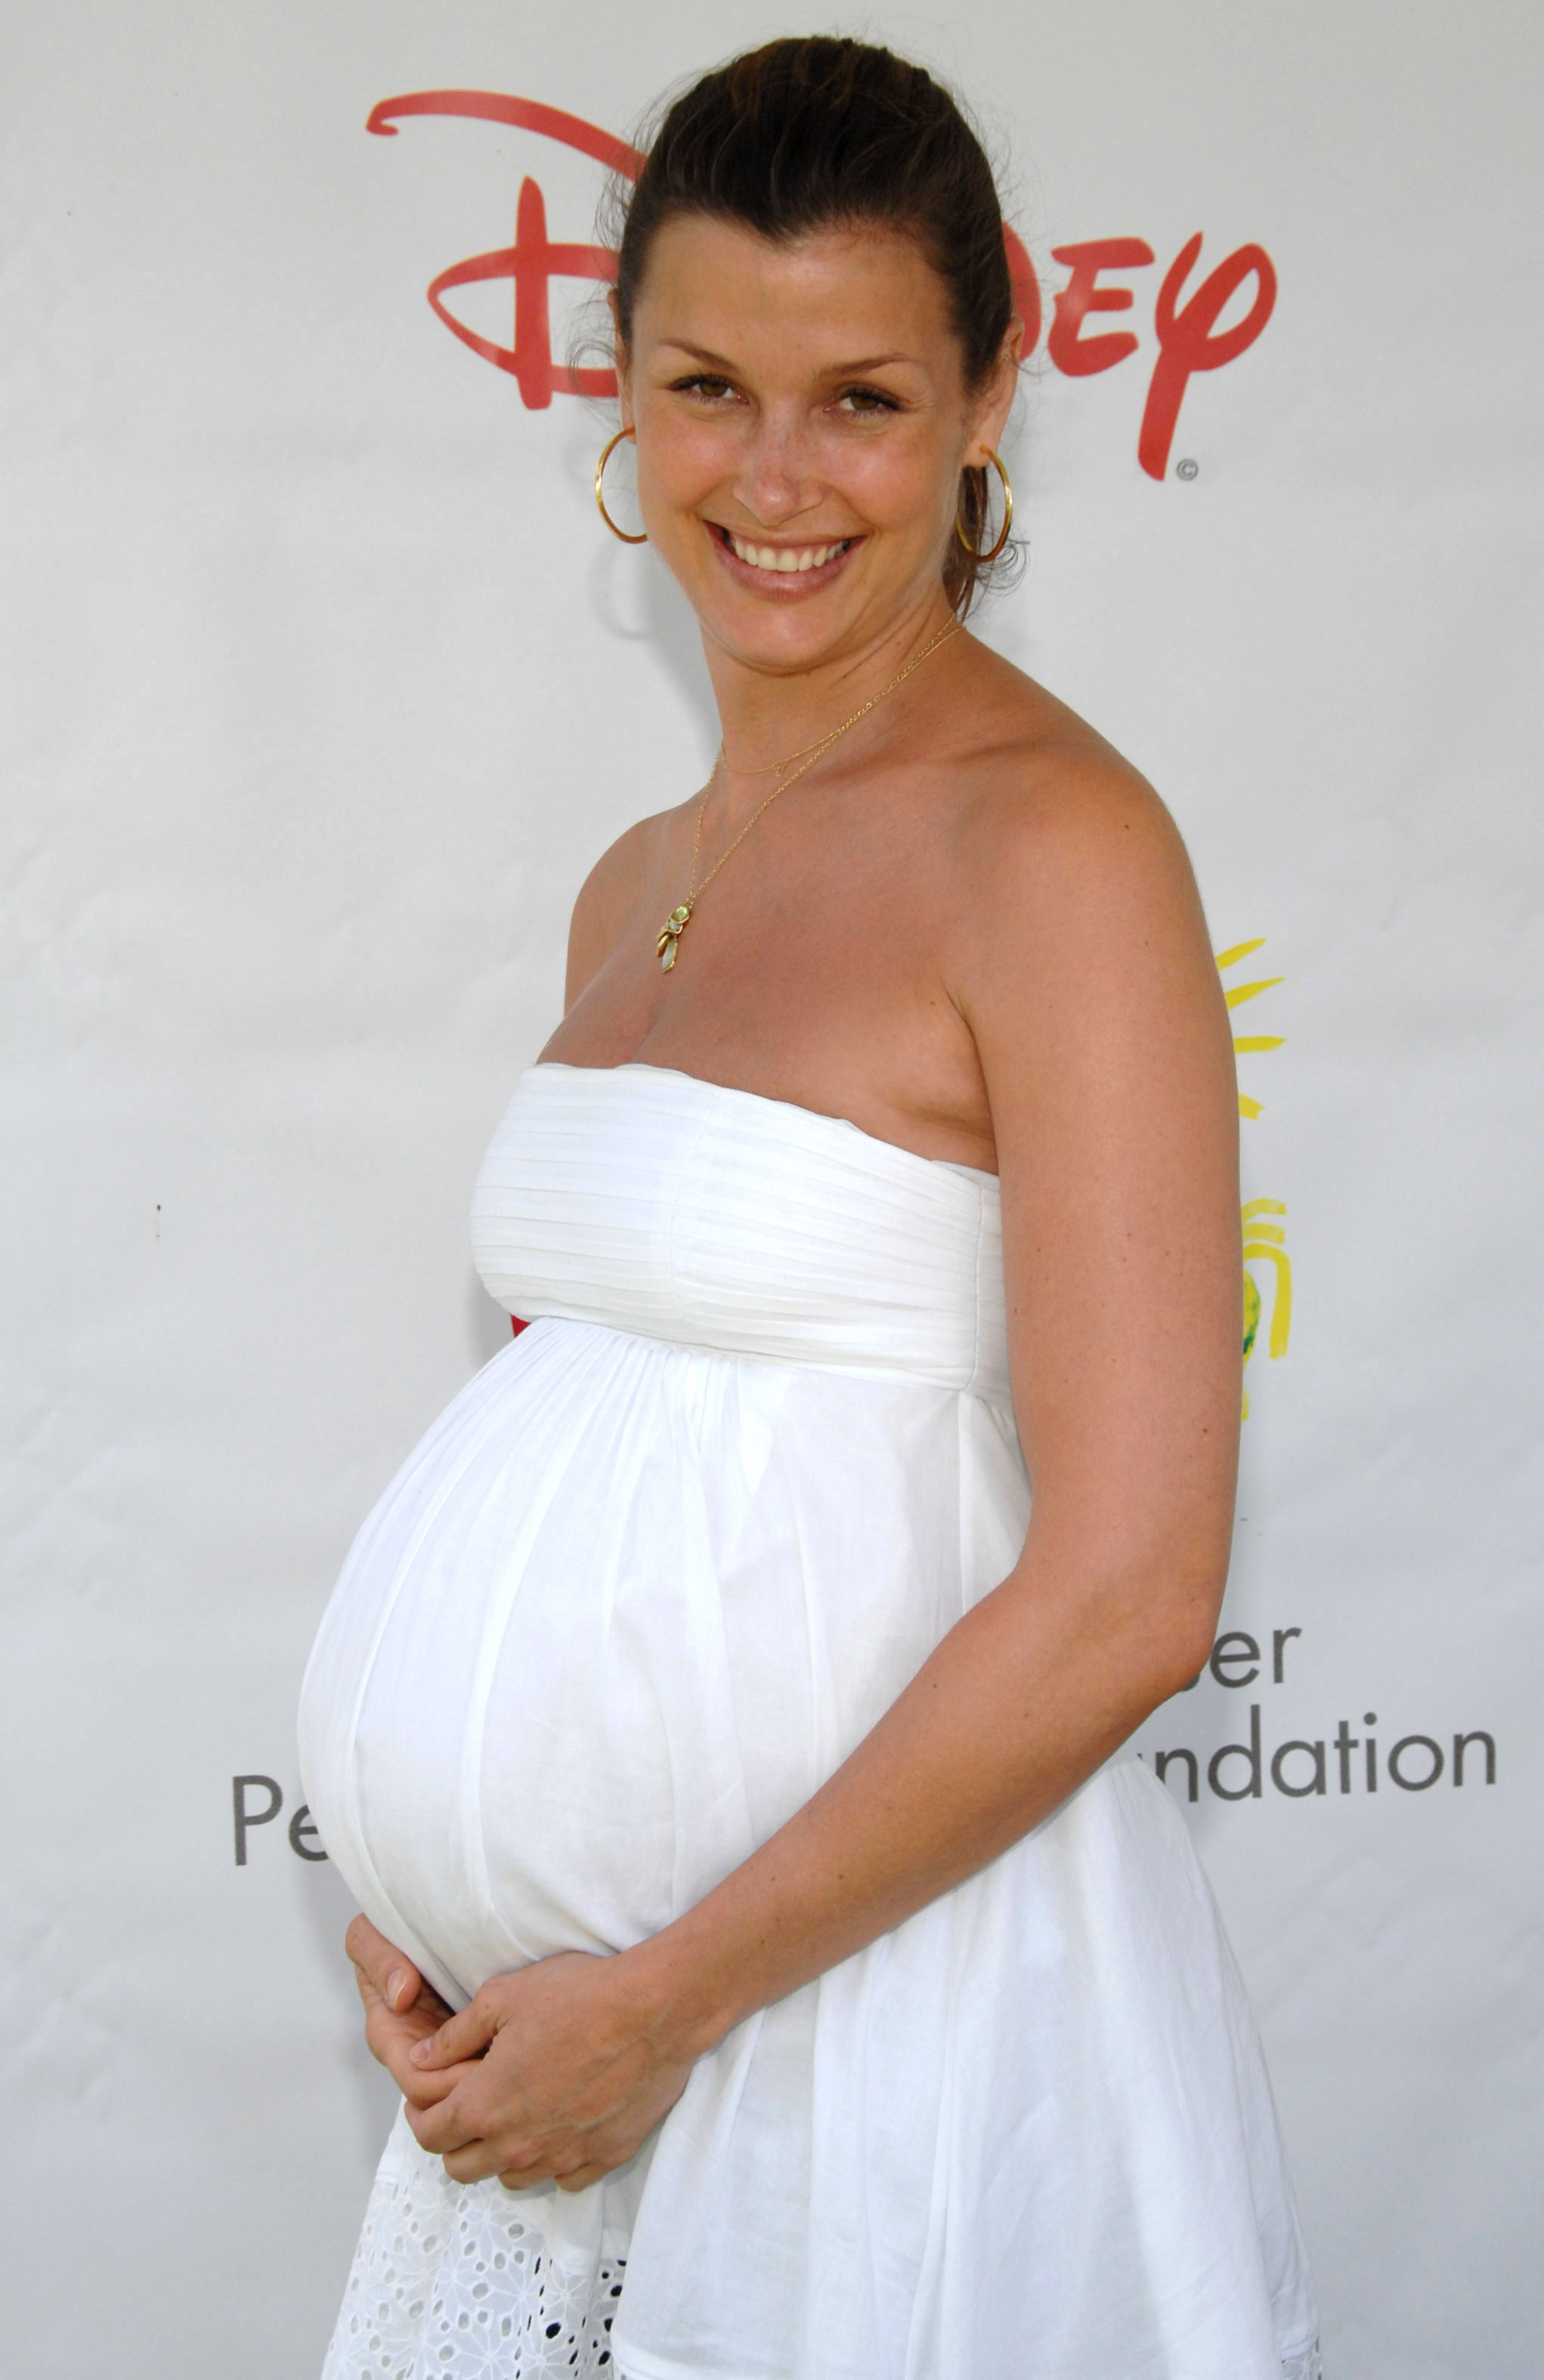 Bridget Moynahan attend the "Time for Heroes," sponsored by Disney to benefit the Elizabeth Glaser Pediatric AIDS Foundation, on June 10, 2007, at Wadsworth Theater in Westwood, California. | Source: Getty Images